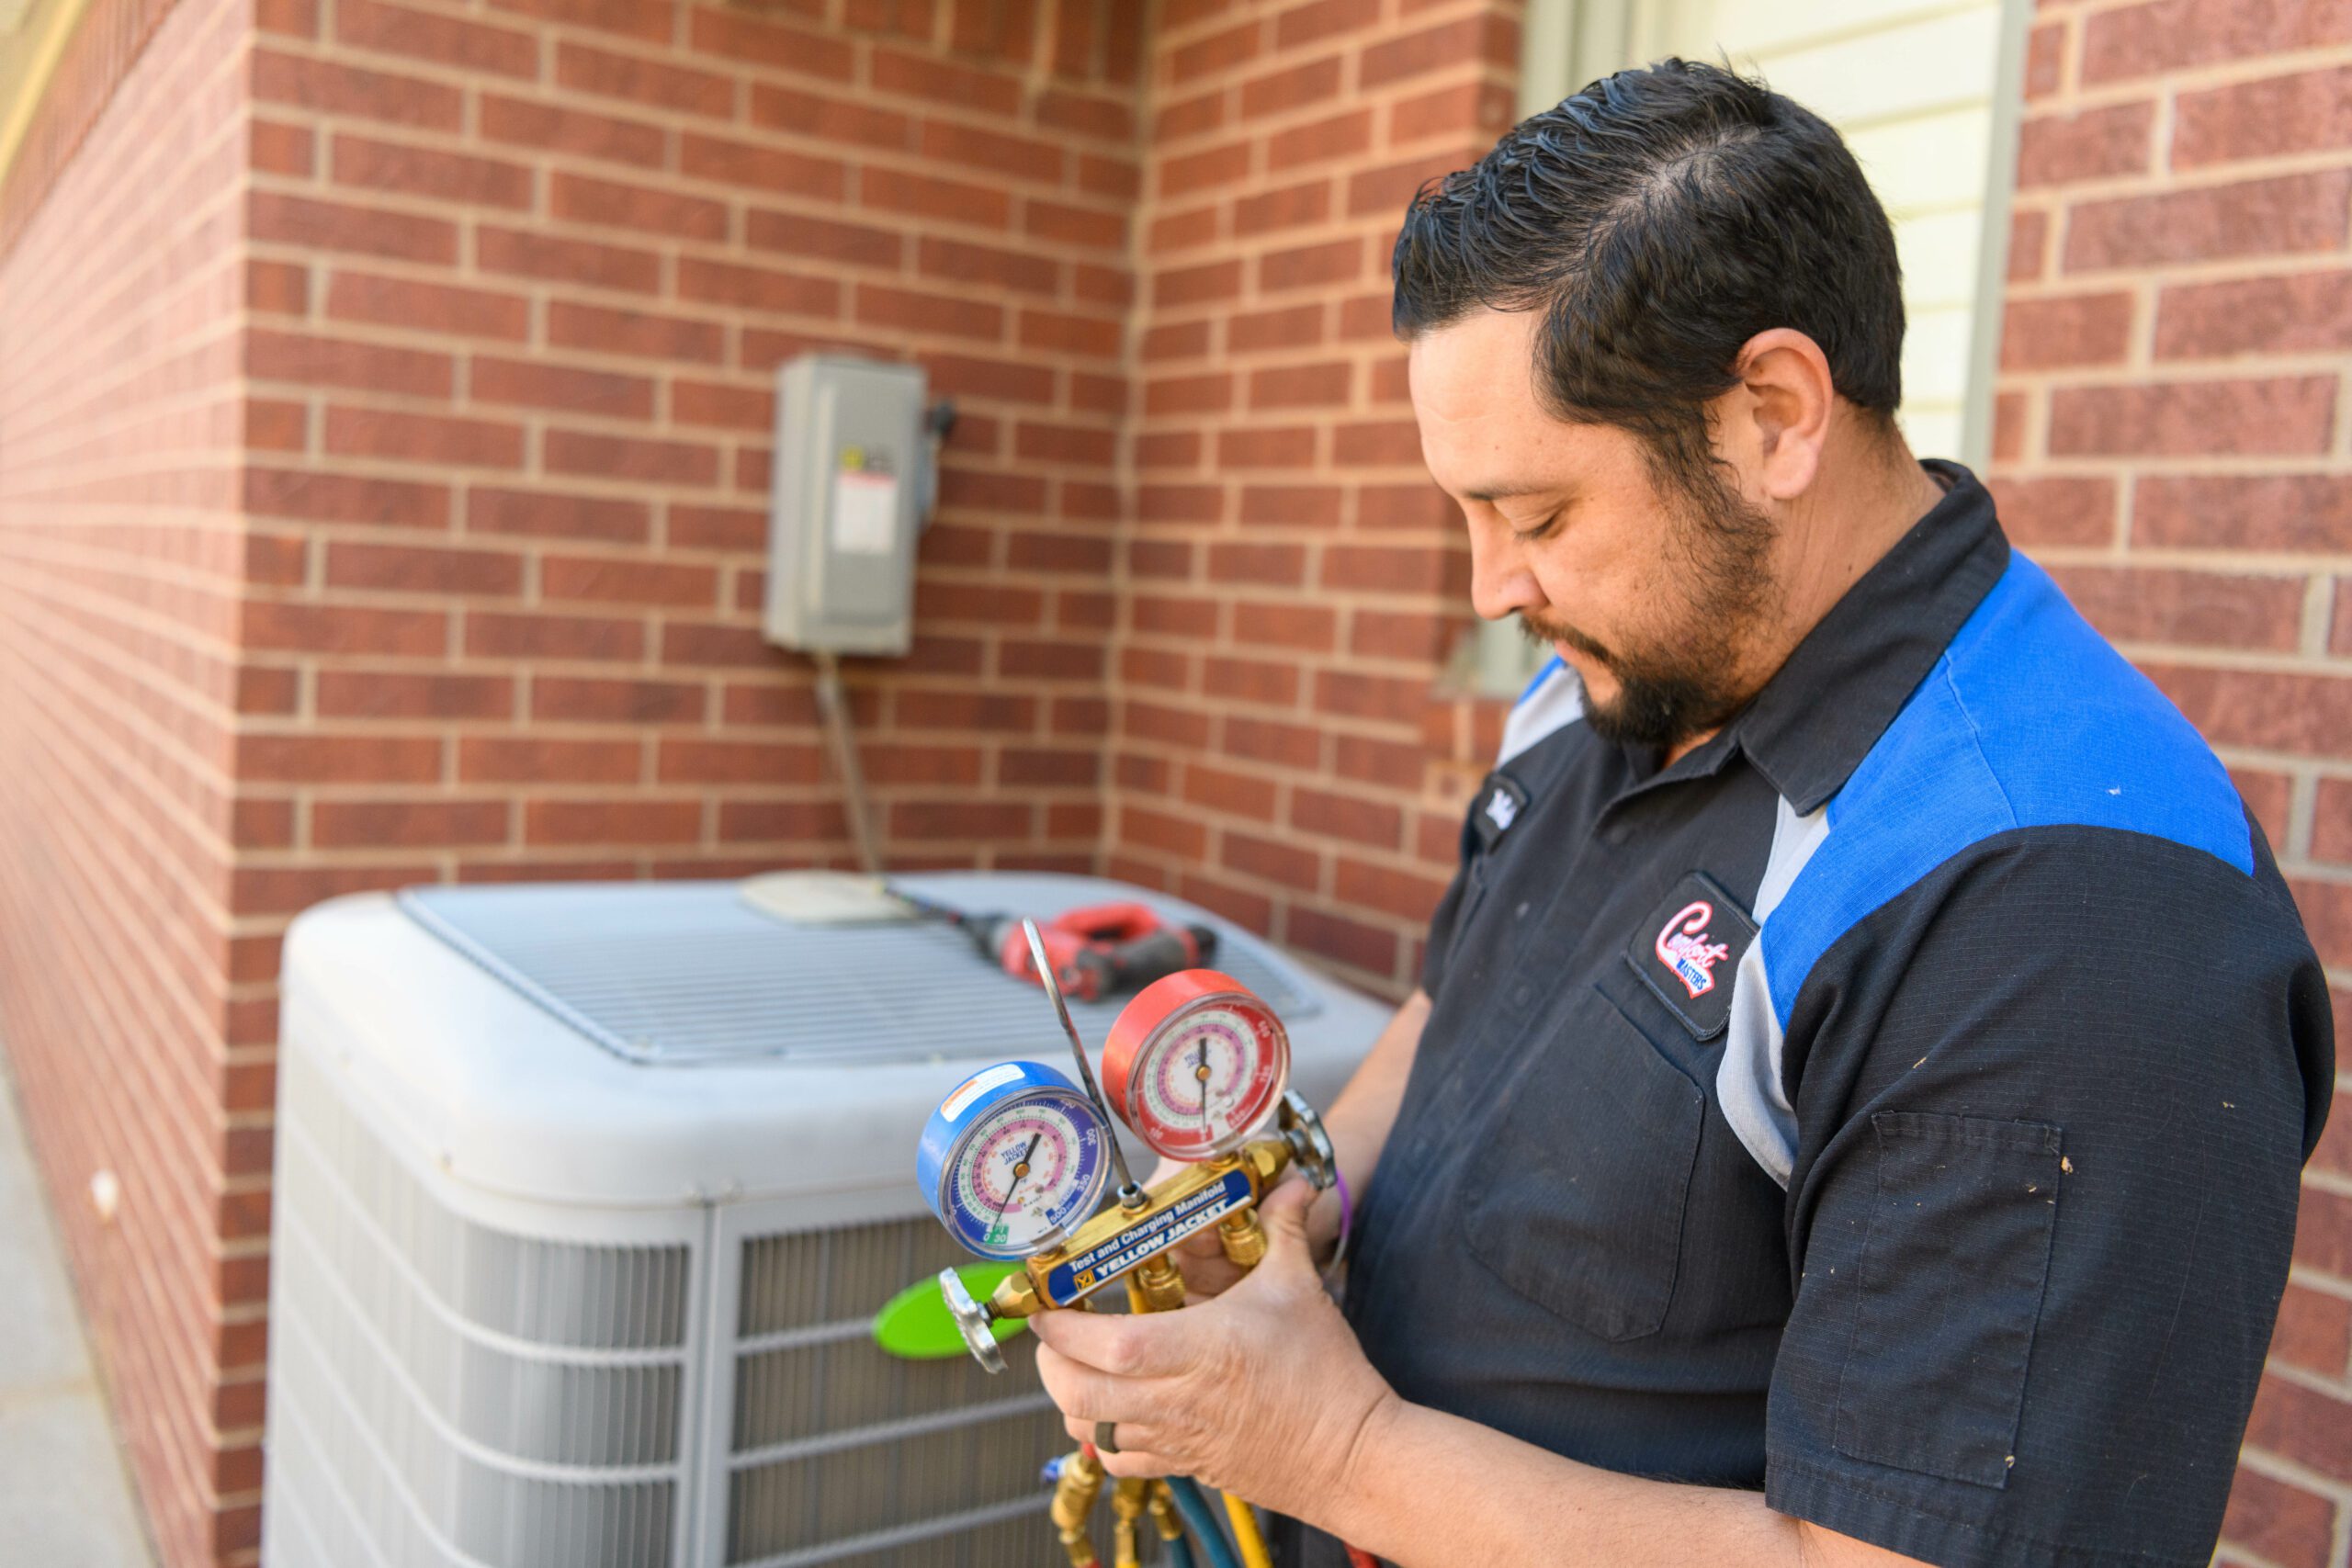 Man working with gauges in front of AC unit